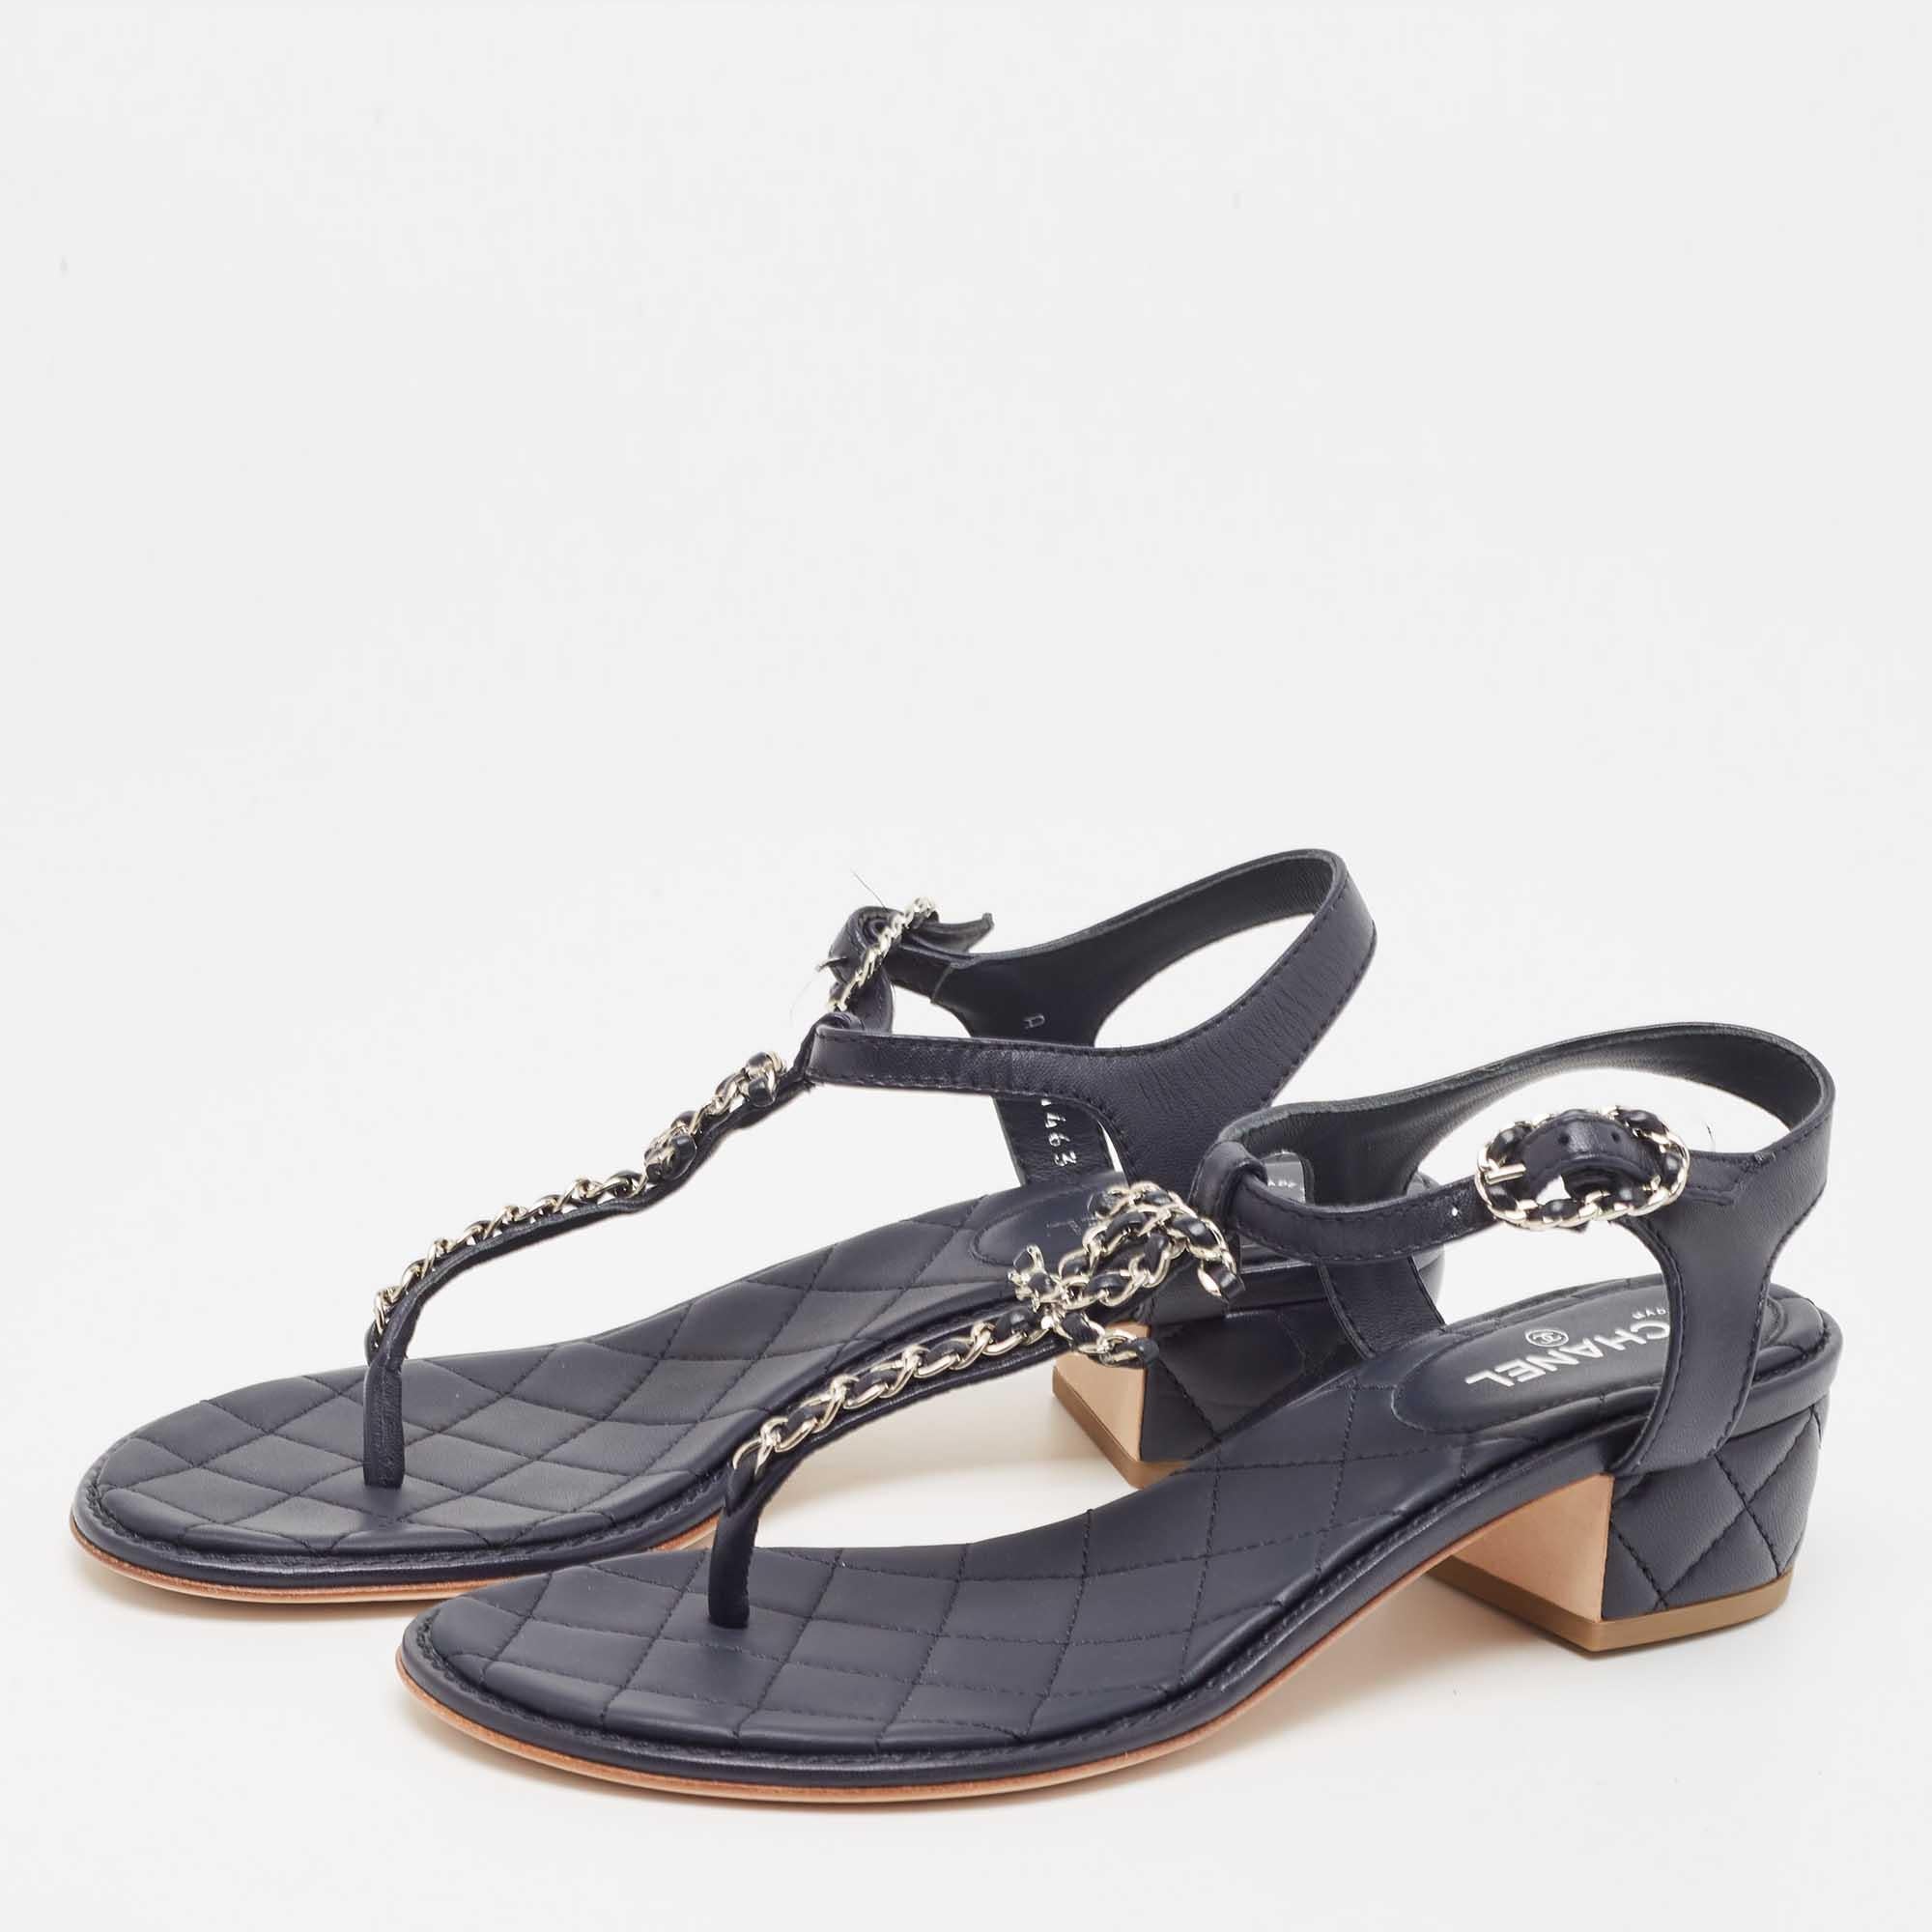 Wear these designer sandals to spruce up any outfit. They are versatile, chic, and can be easily styled. Made using quality materials, these sandals are well-built and long-lasting.

Includes: Original Box